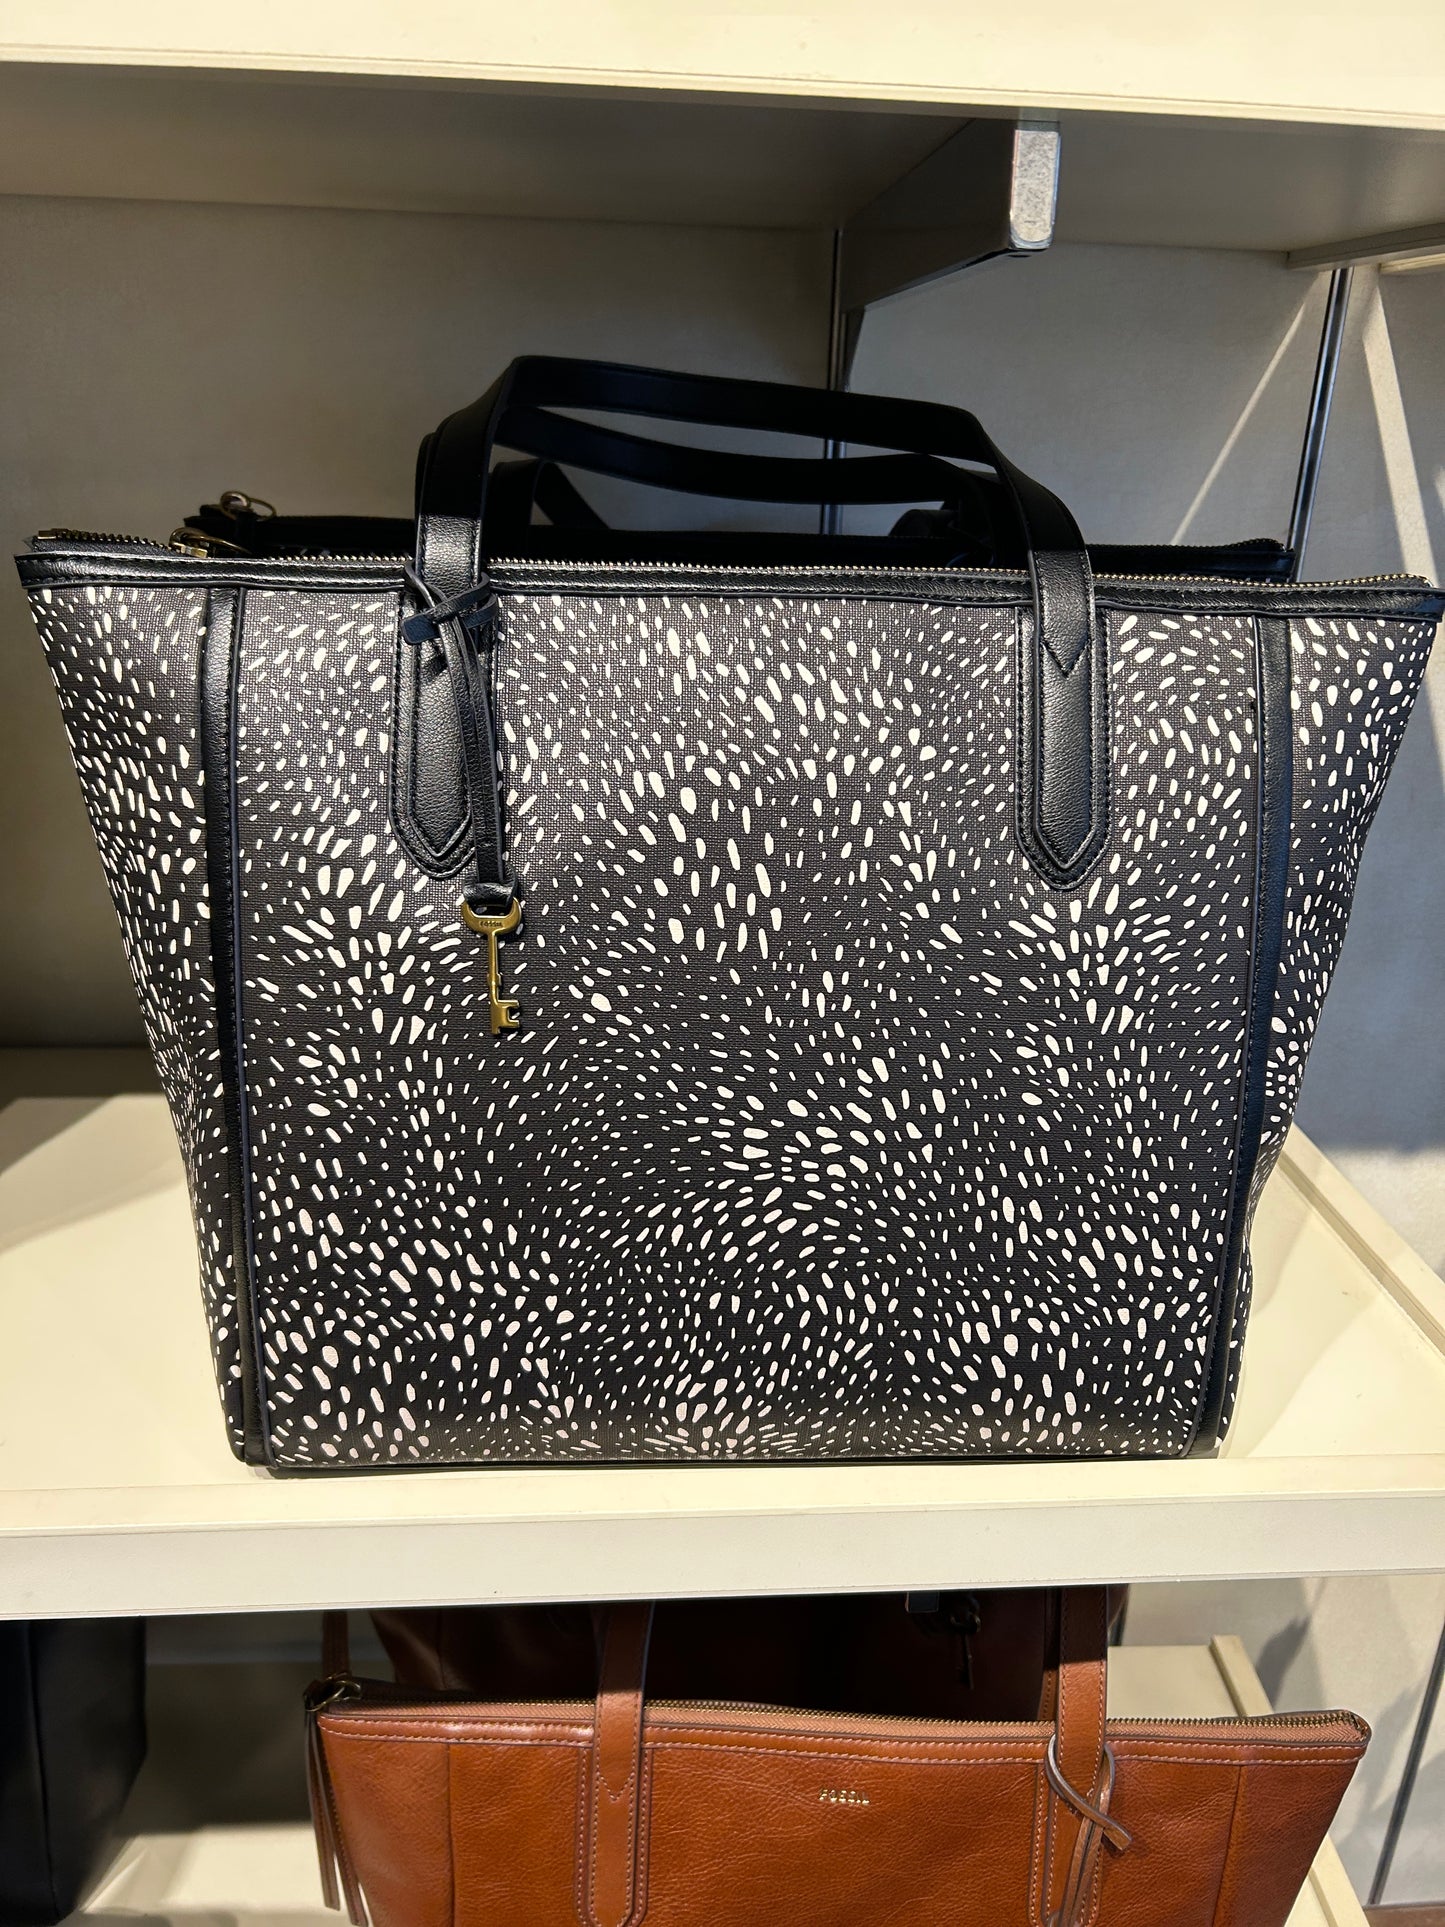 Fossil Sydney Tote In Black Cheetah